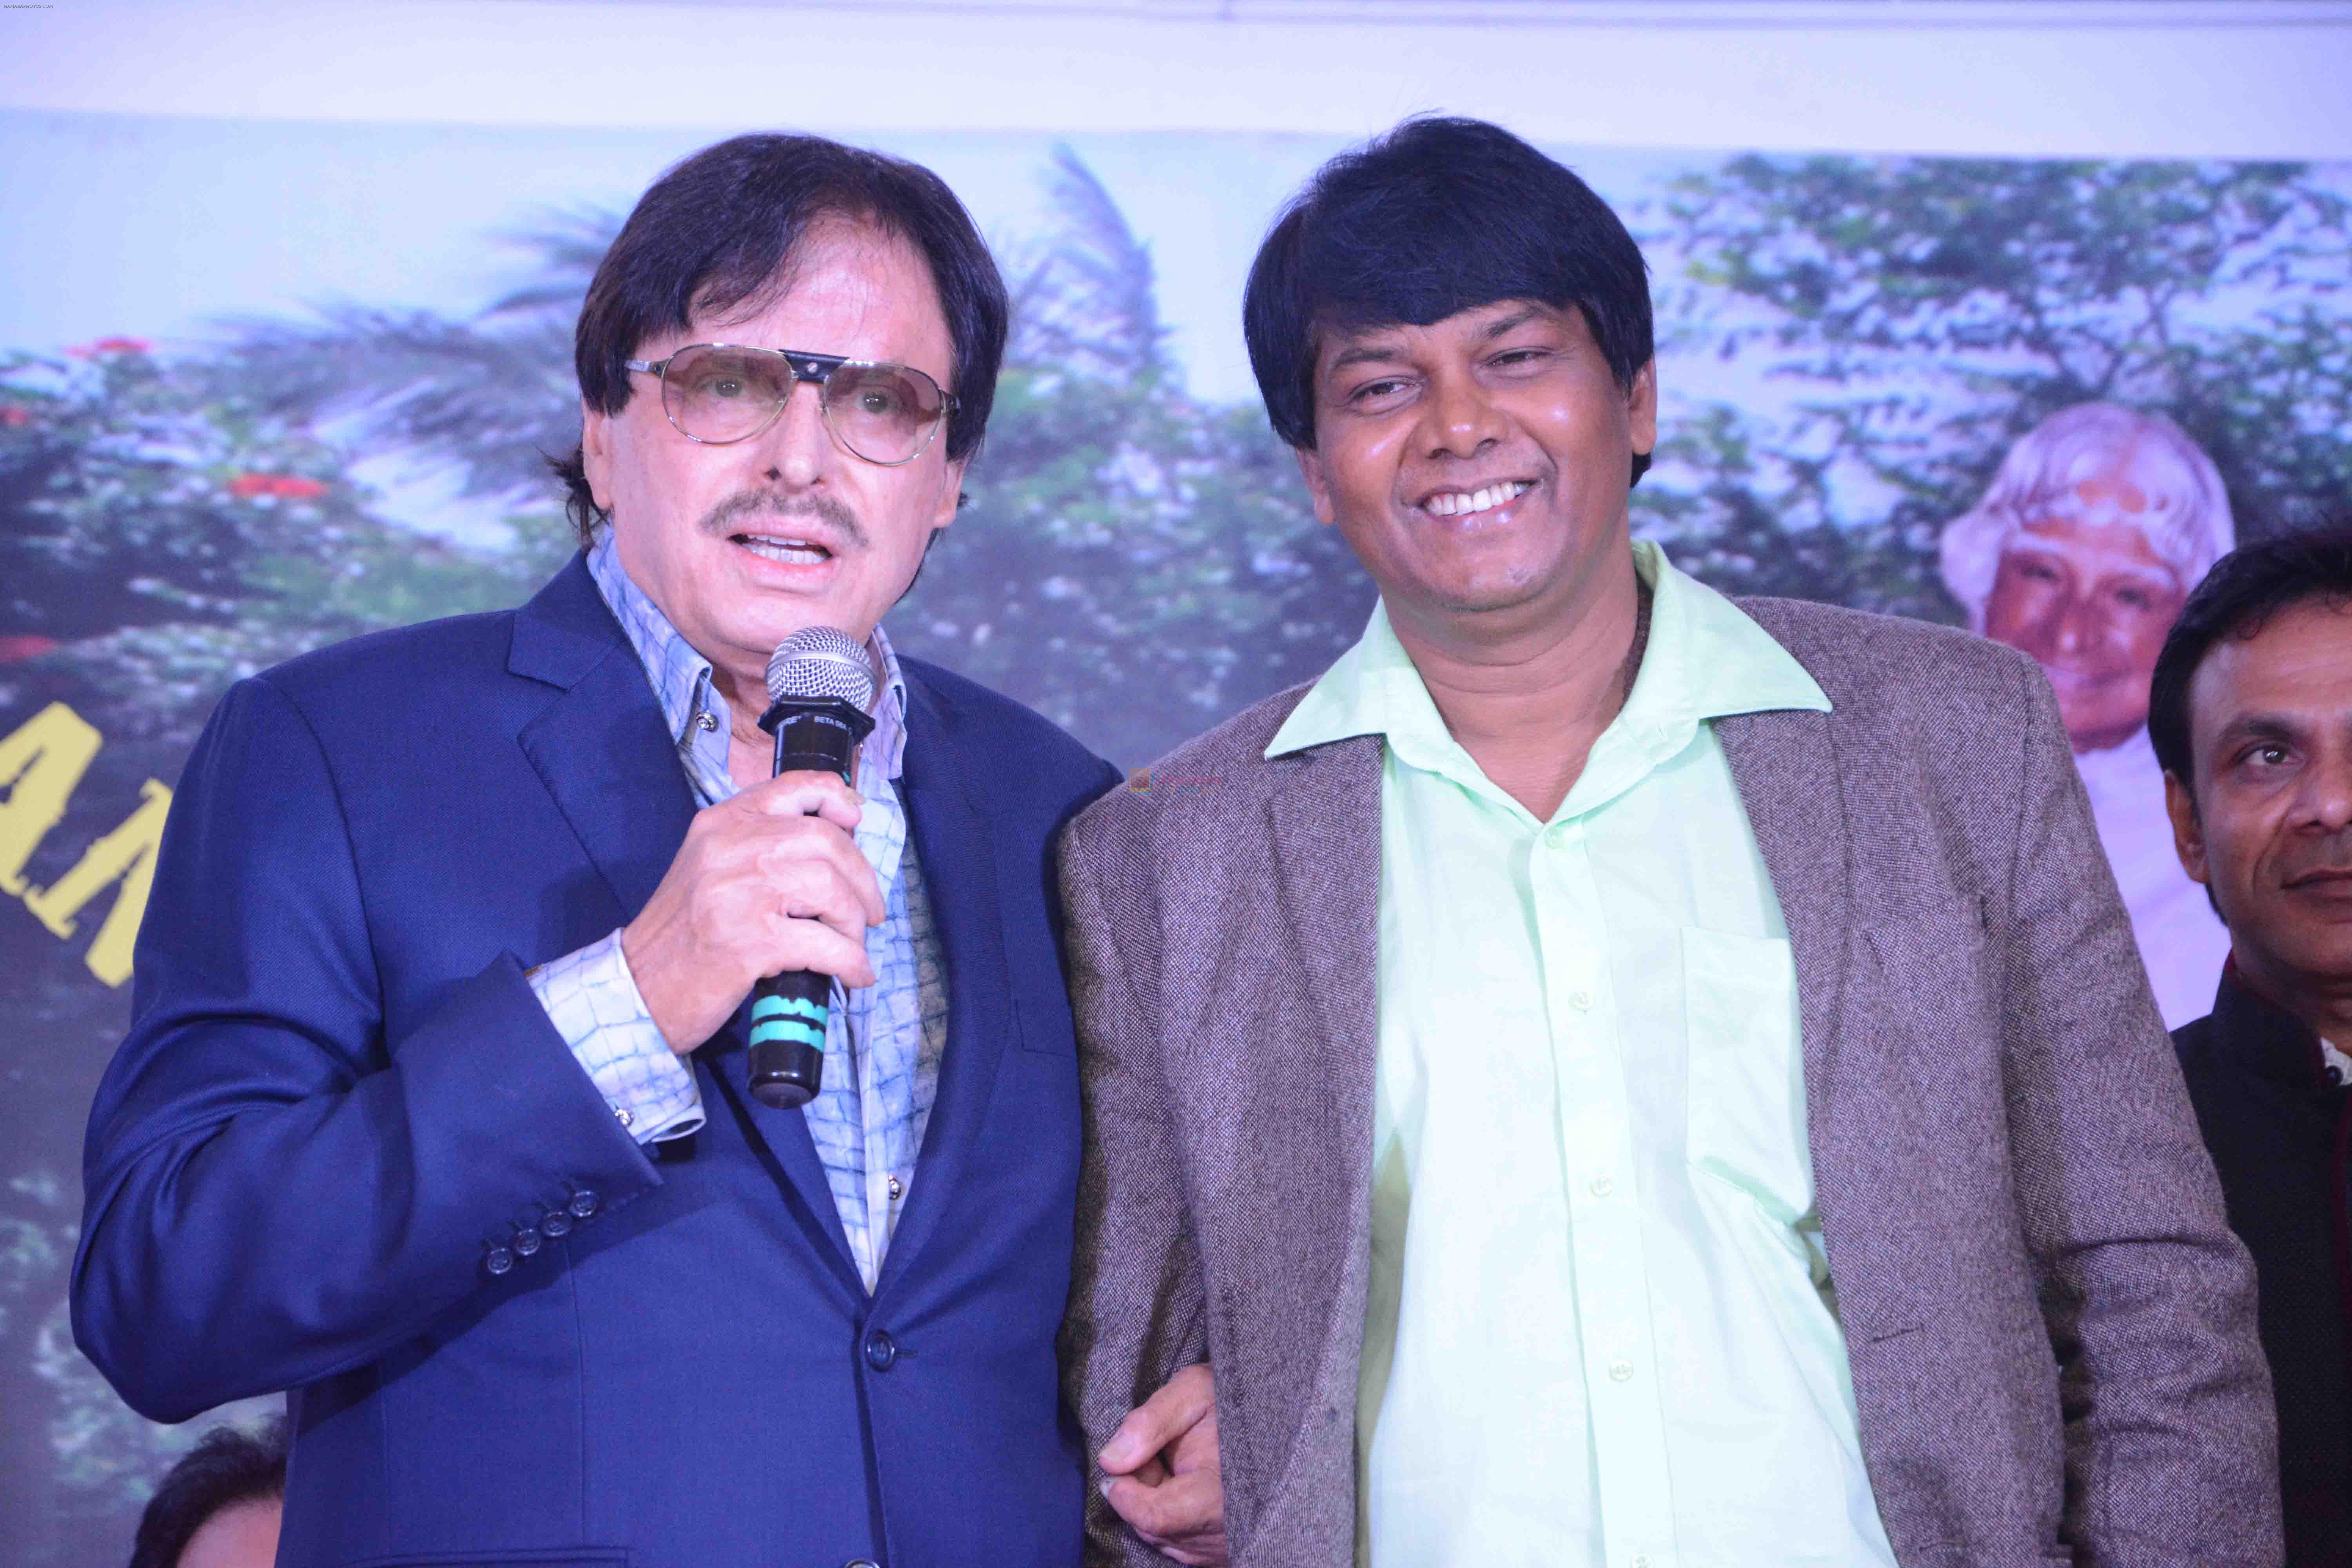 Sanjay Khan With Hemant Tantia attend Hemant Tantia song launch for Republic Day